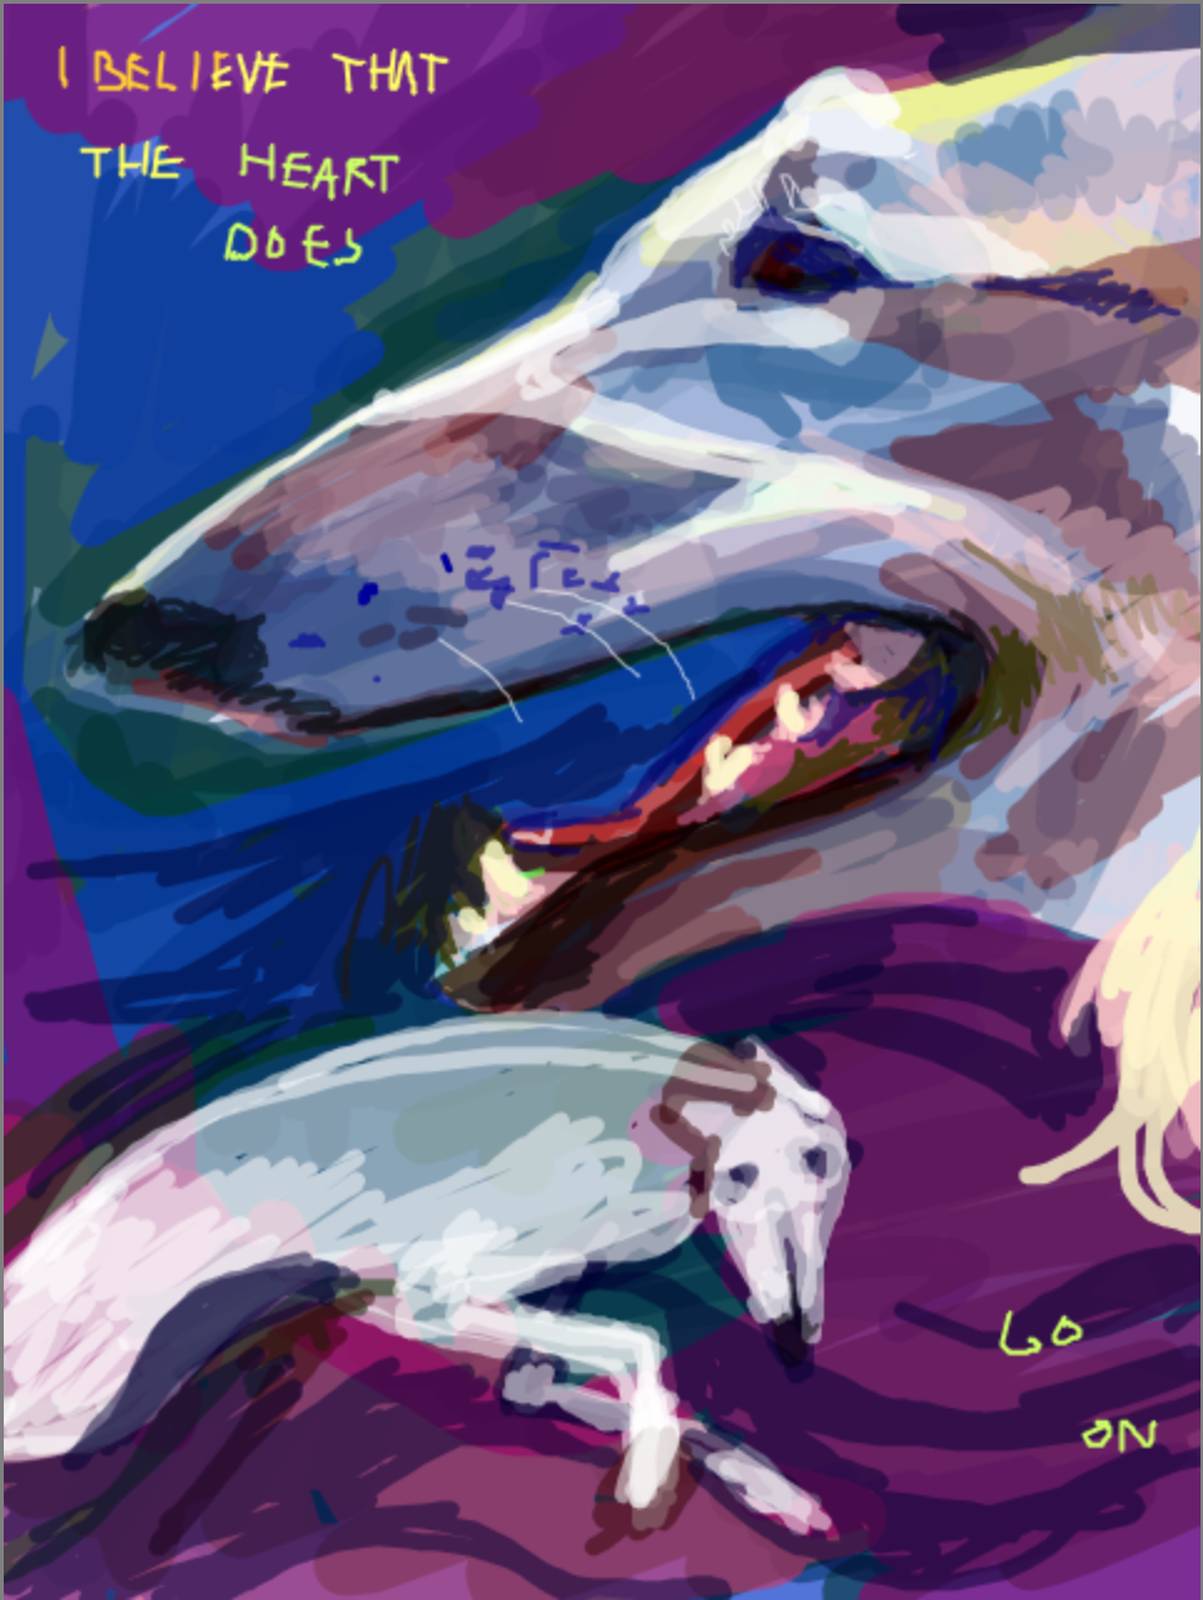 Drawing fo a borzoi running and a closeup of a borzoi face. Text reads: I believe that the heart does go on